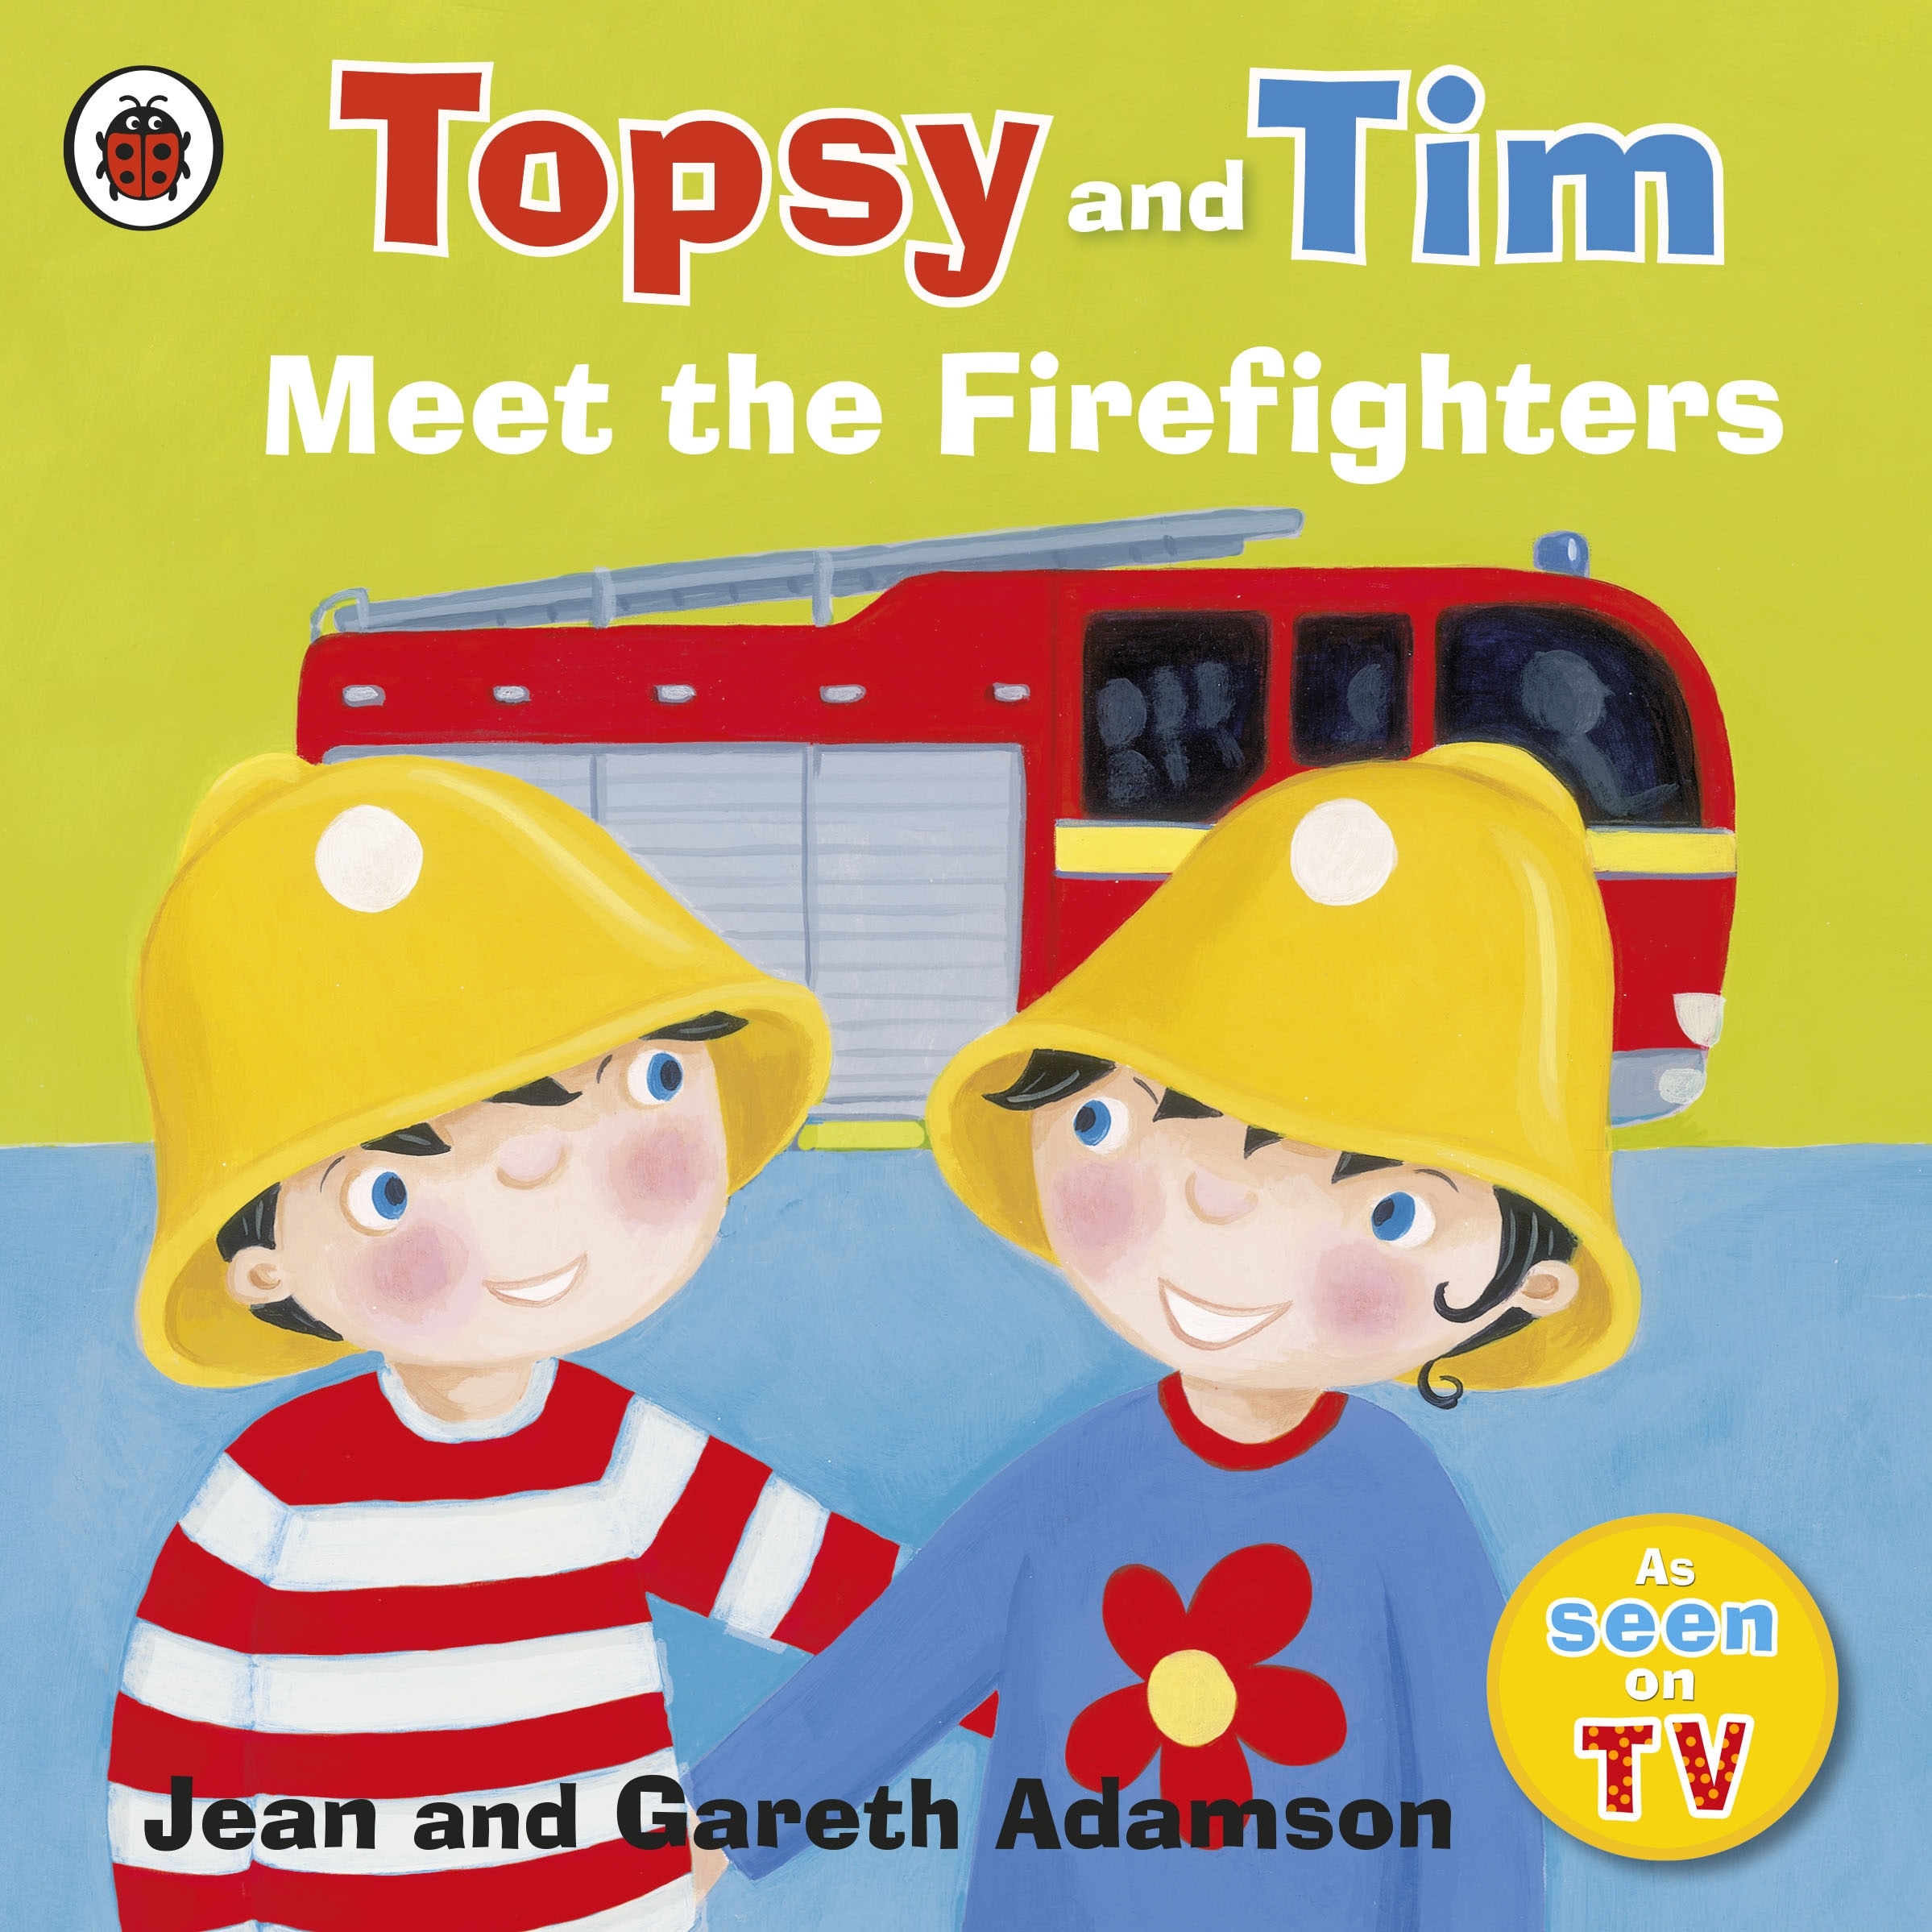 Book “Topsy and Tim: Meet the Firefighters” by Jean Adamson — April 7, 2011